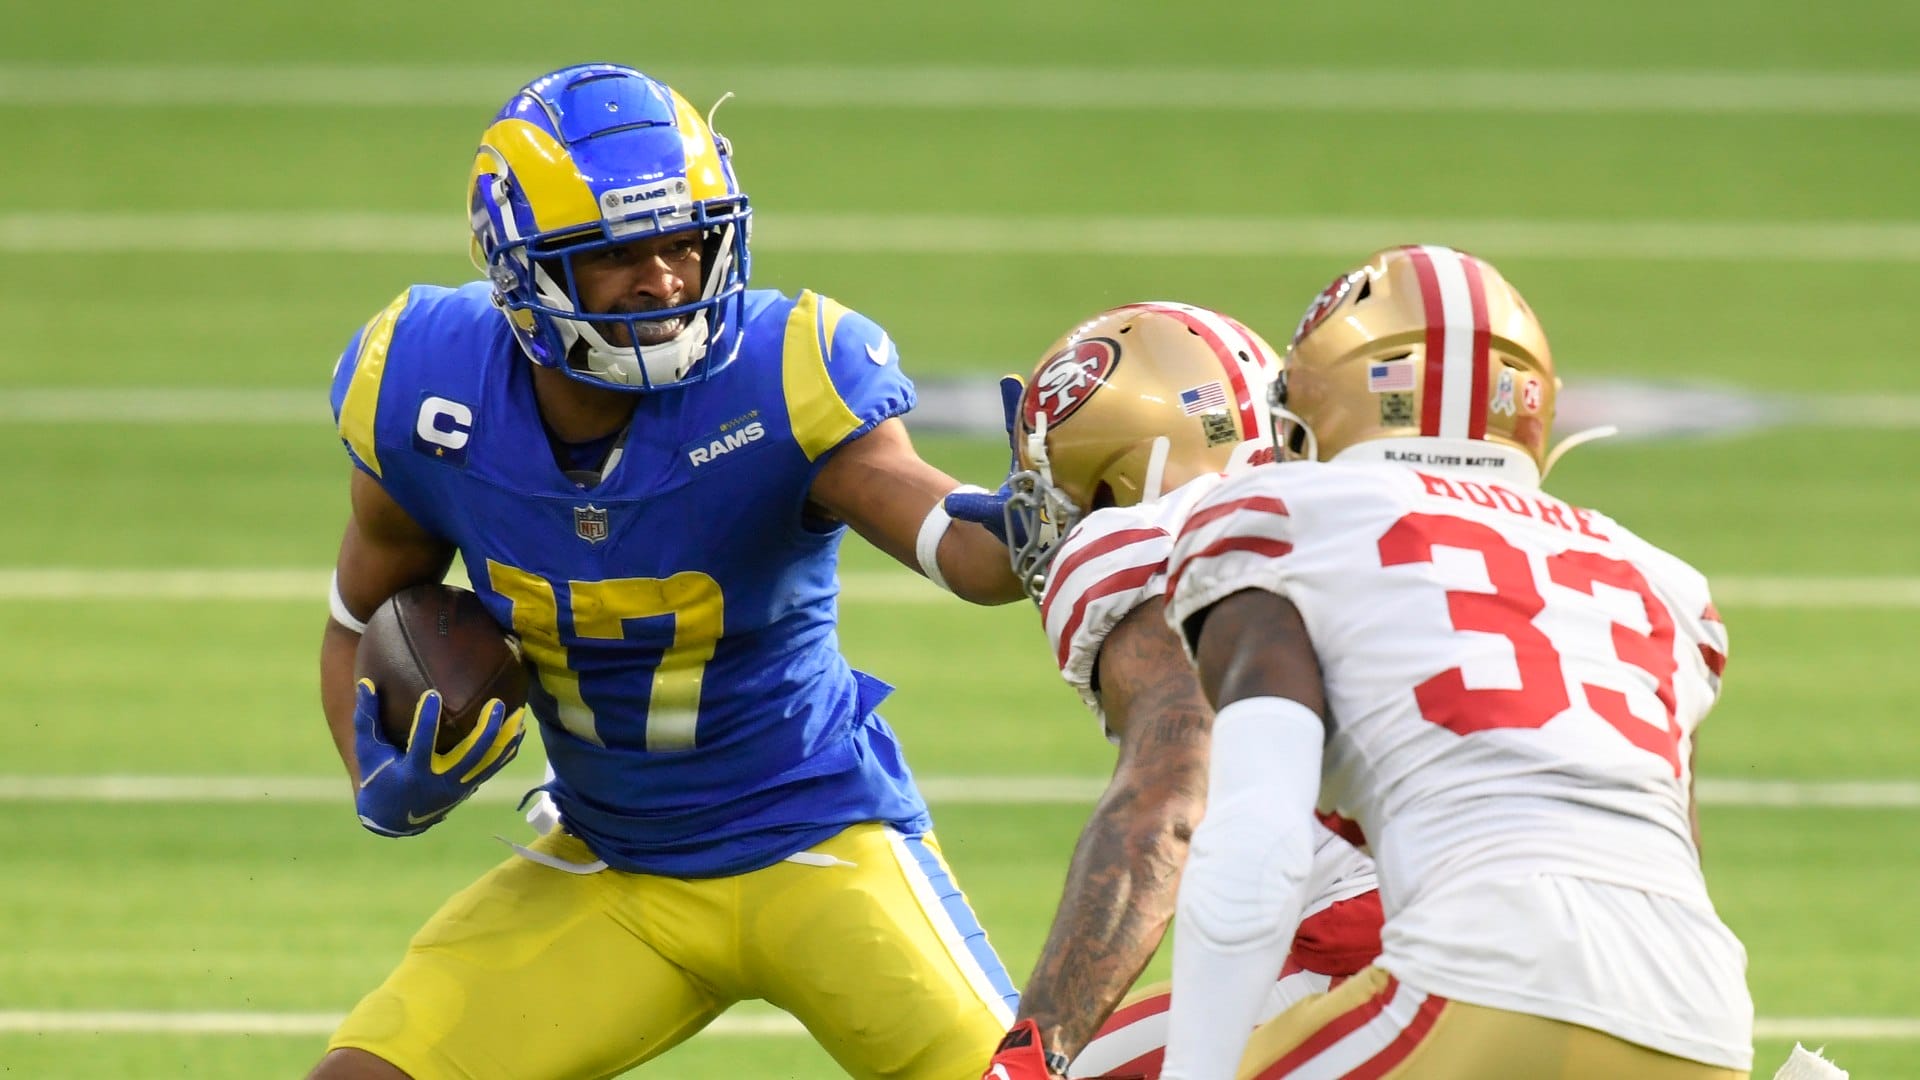 Robert Woods #17 of the Los Angeles Rams runs with the ball during the first half against the San Francisco 49ers at SoFi Stadium on November 29, 2020 in Inglewood, California. (Photo by Harry How/Getty Images)